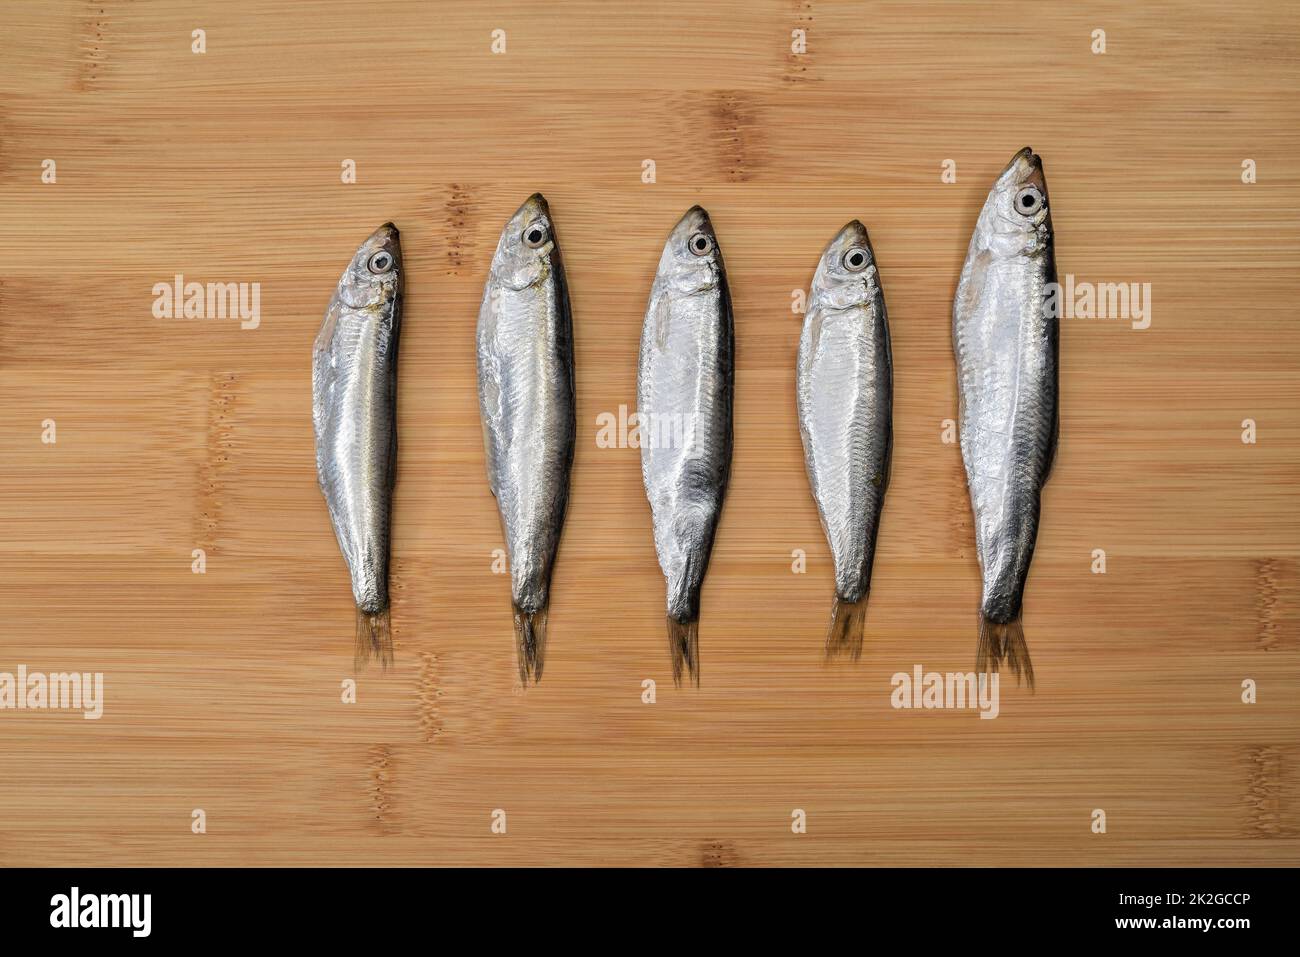 Top view of fresh anchovies on wooden cutting board background. Raw fish prepared for cooking. Stock Photo